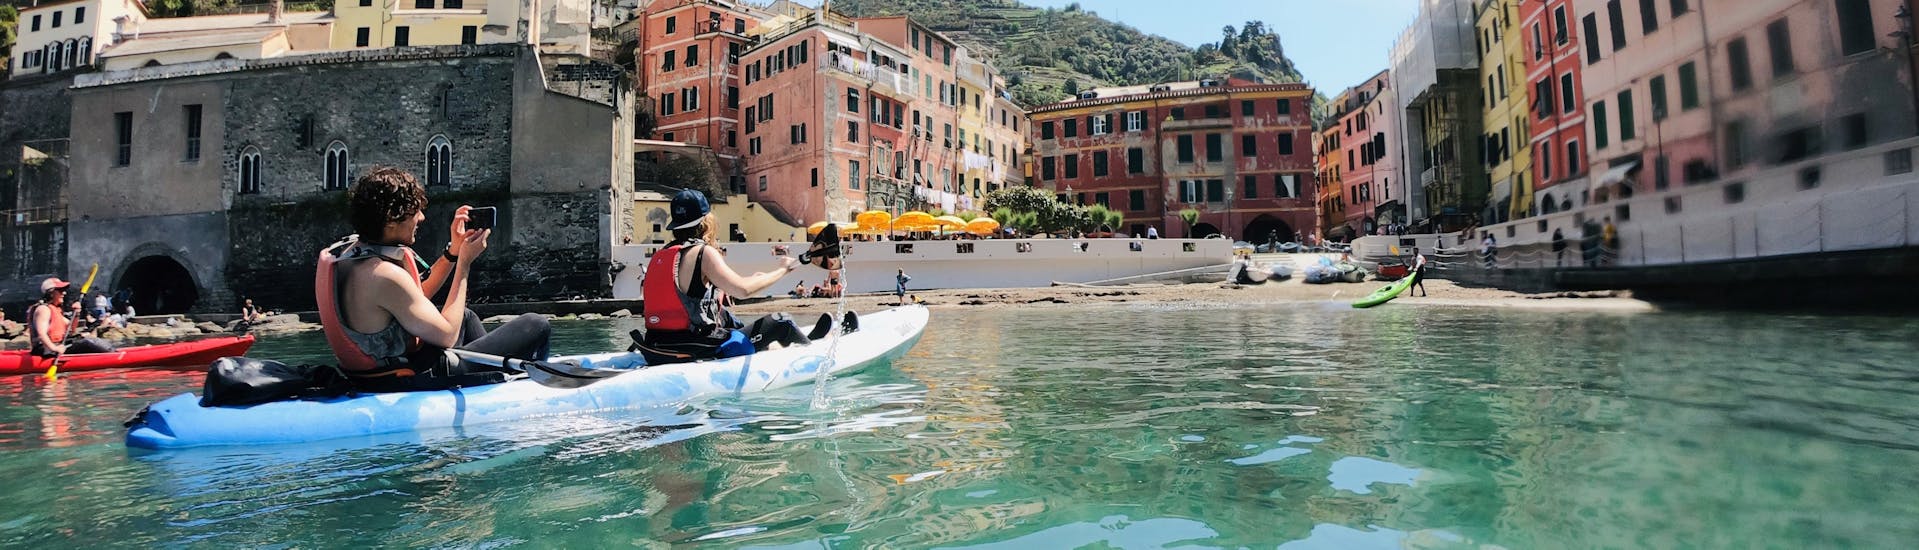 People on kayaks in front of Vernazza during our Kayak Tour in Cinque Terre from Monterosso to Vernazza with Outdoor Portofino.